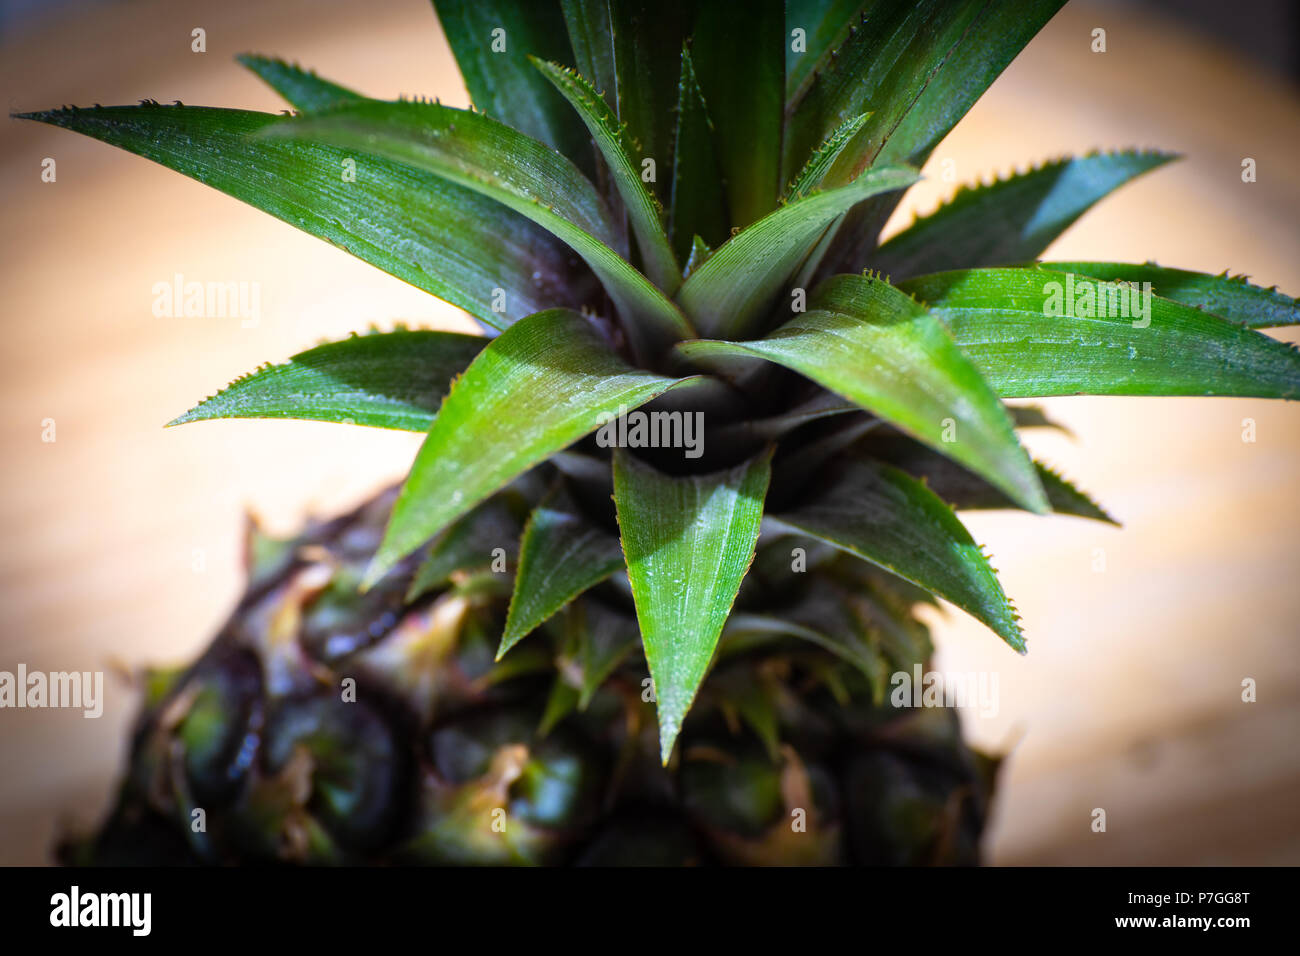 Tough spiky leaves at the top of a pineapple, grown in Jamaica Stock Photo